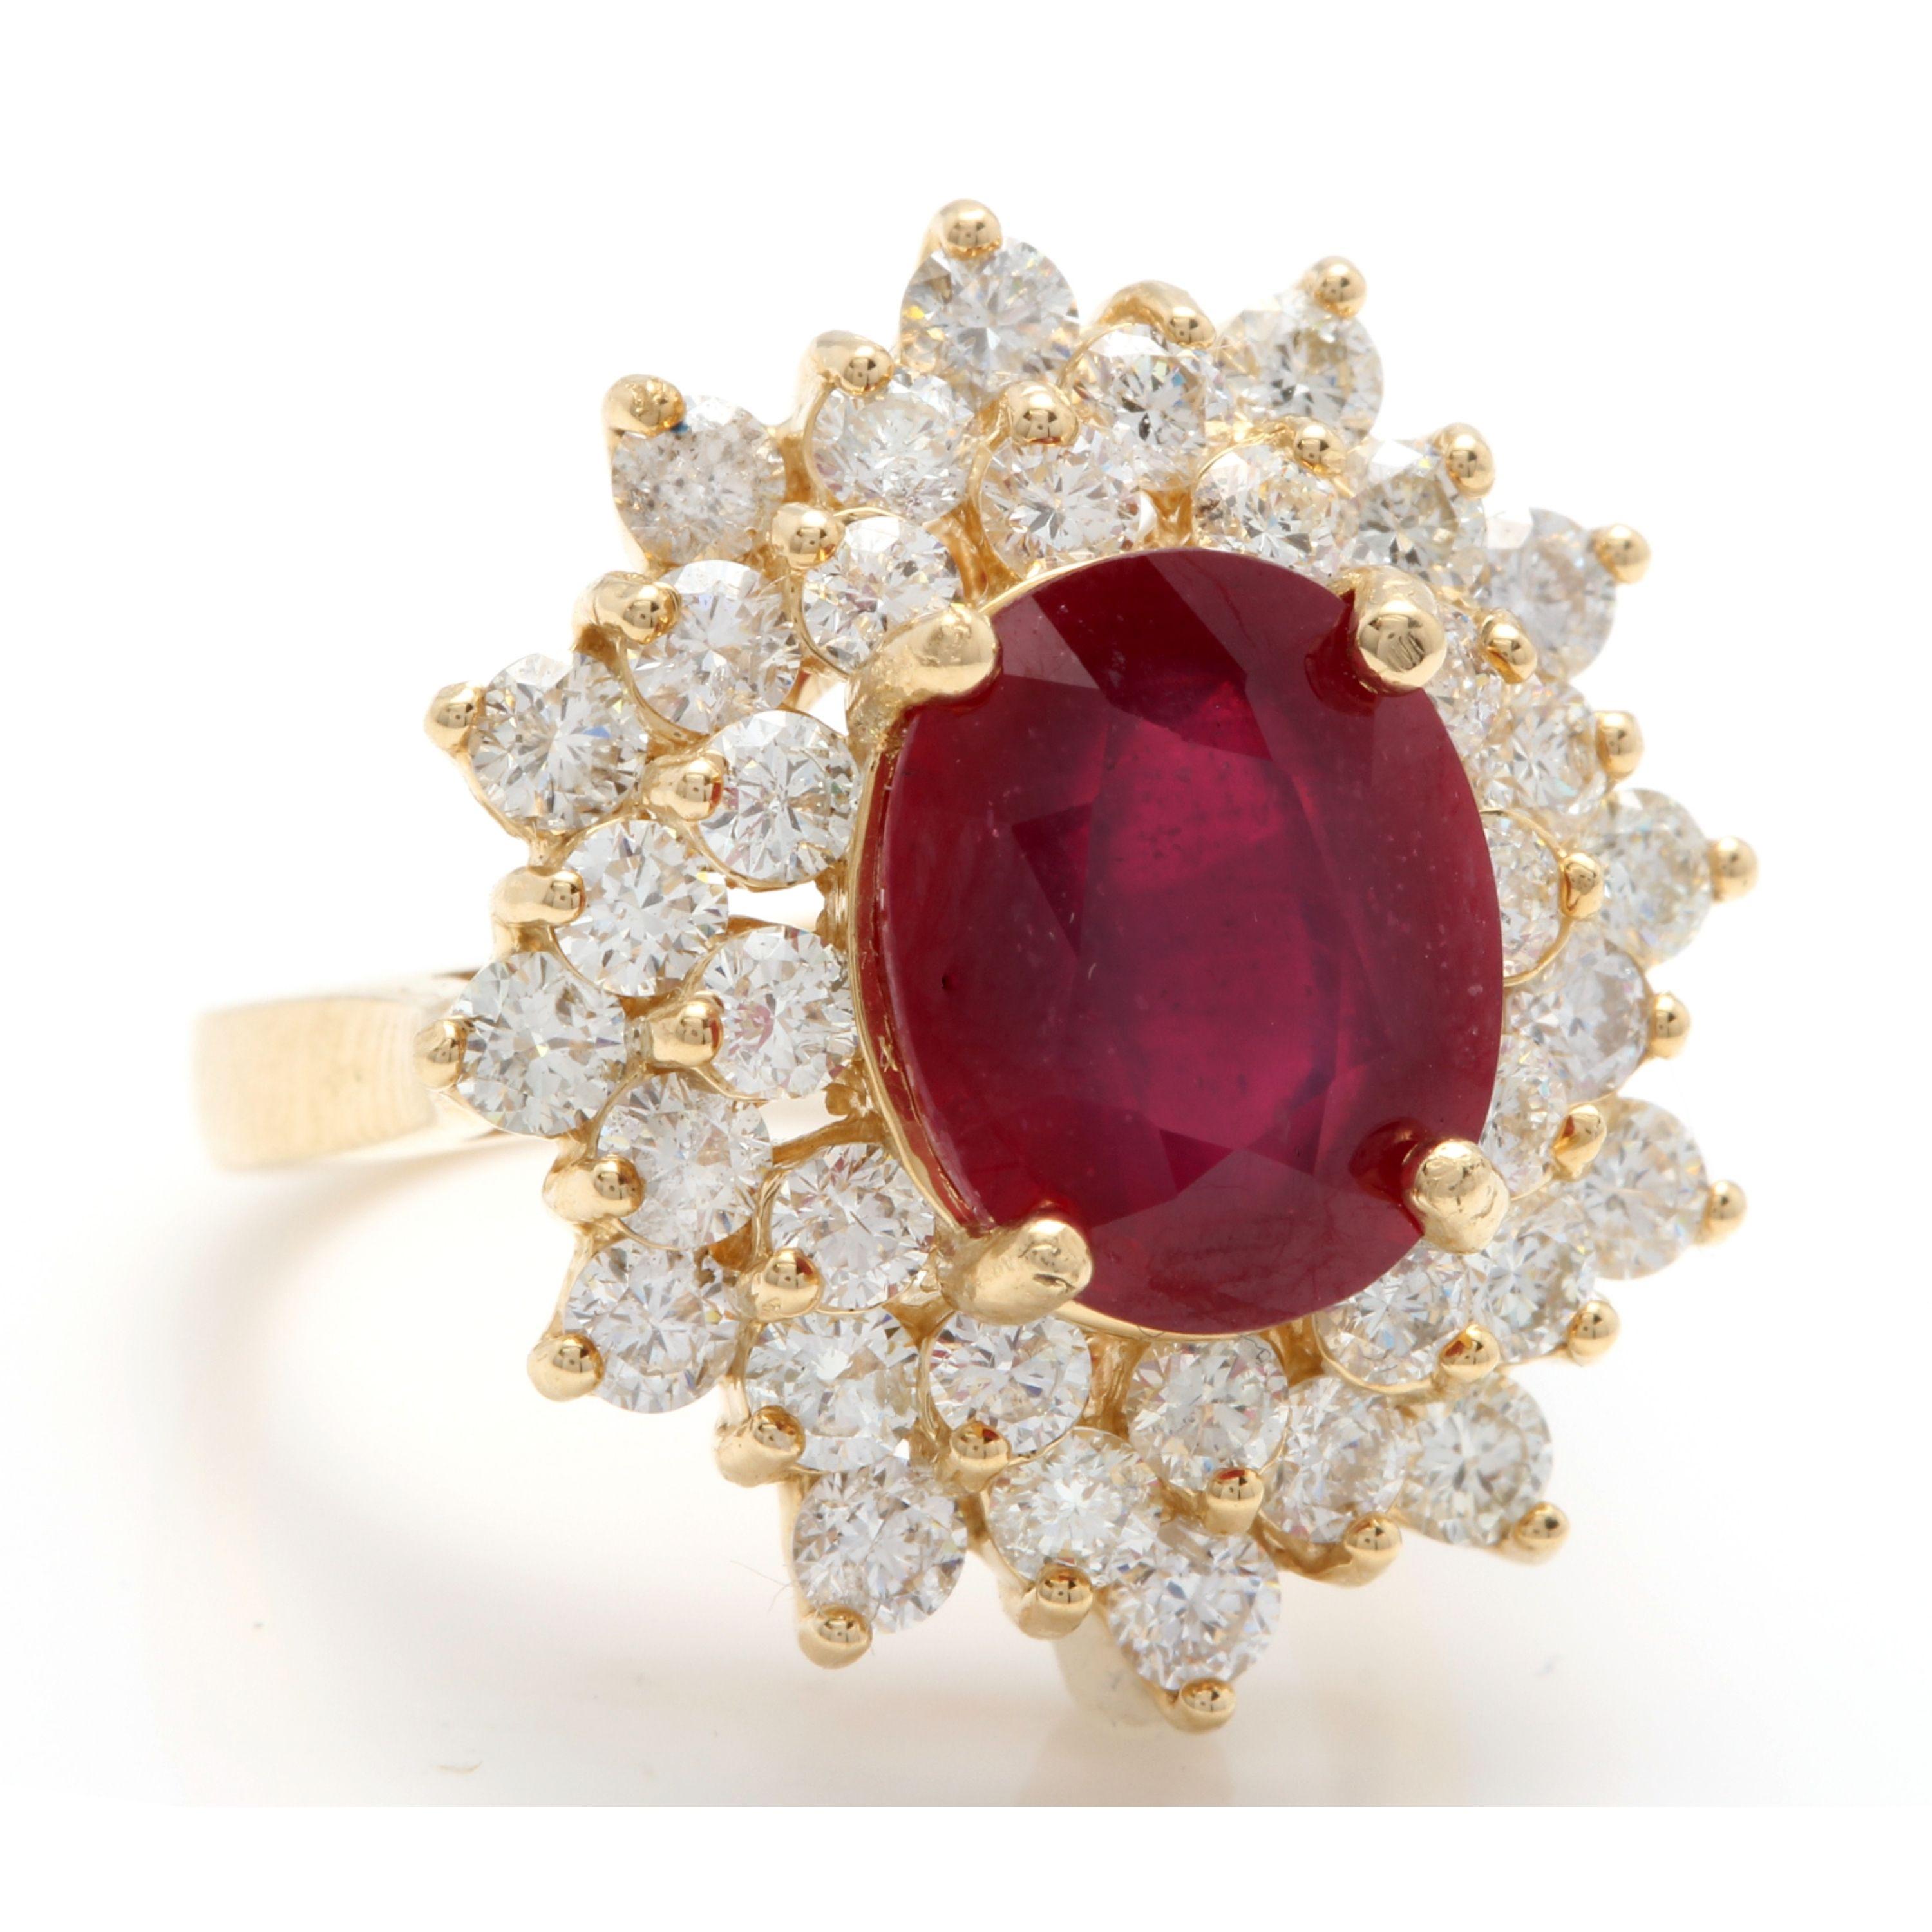 8.40 Carats Impressive Red Ruby and Diamond 14K Yellow Gold Ring

Total Red Ruby Weight is: Approx. 6.50 Carats (Treated: Lead Glass Filling)

Ruby Measures: 11.00 x 9.00mm

Natural Round Diamonds Weight: Approx. 1.90 Carats (color G-H / Clarity